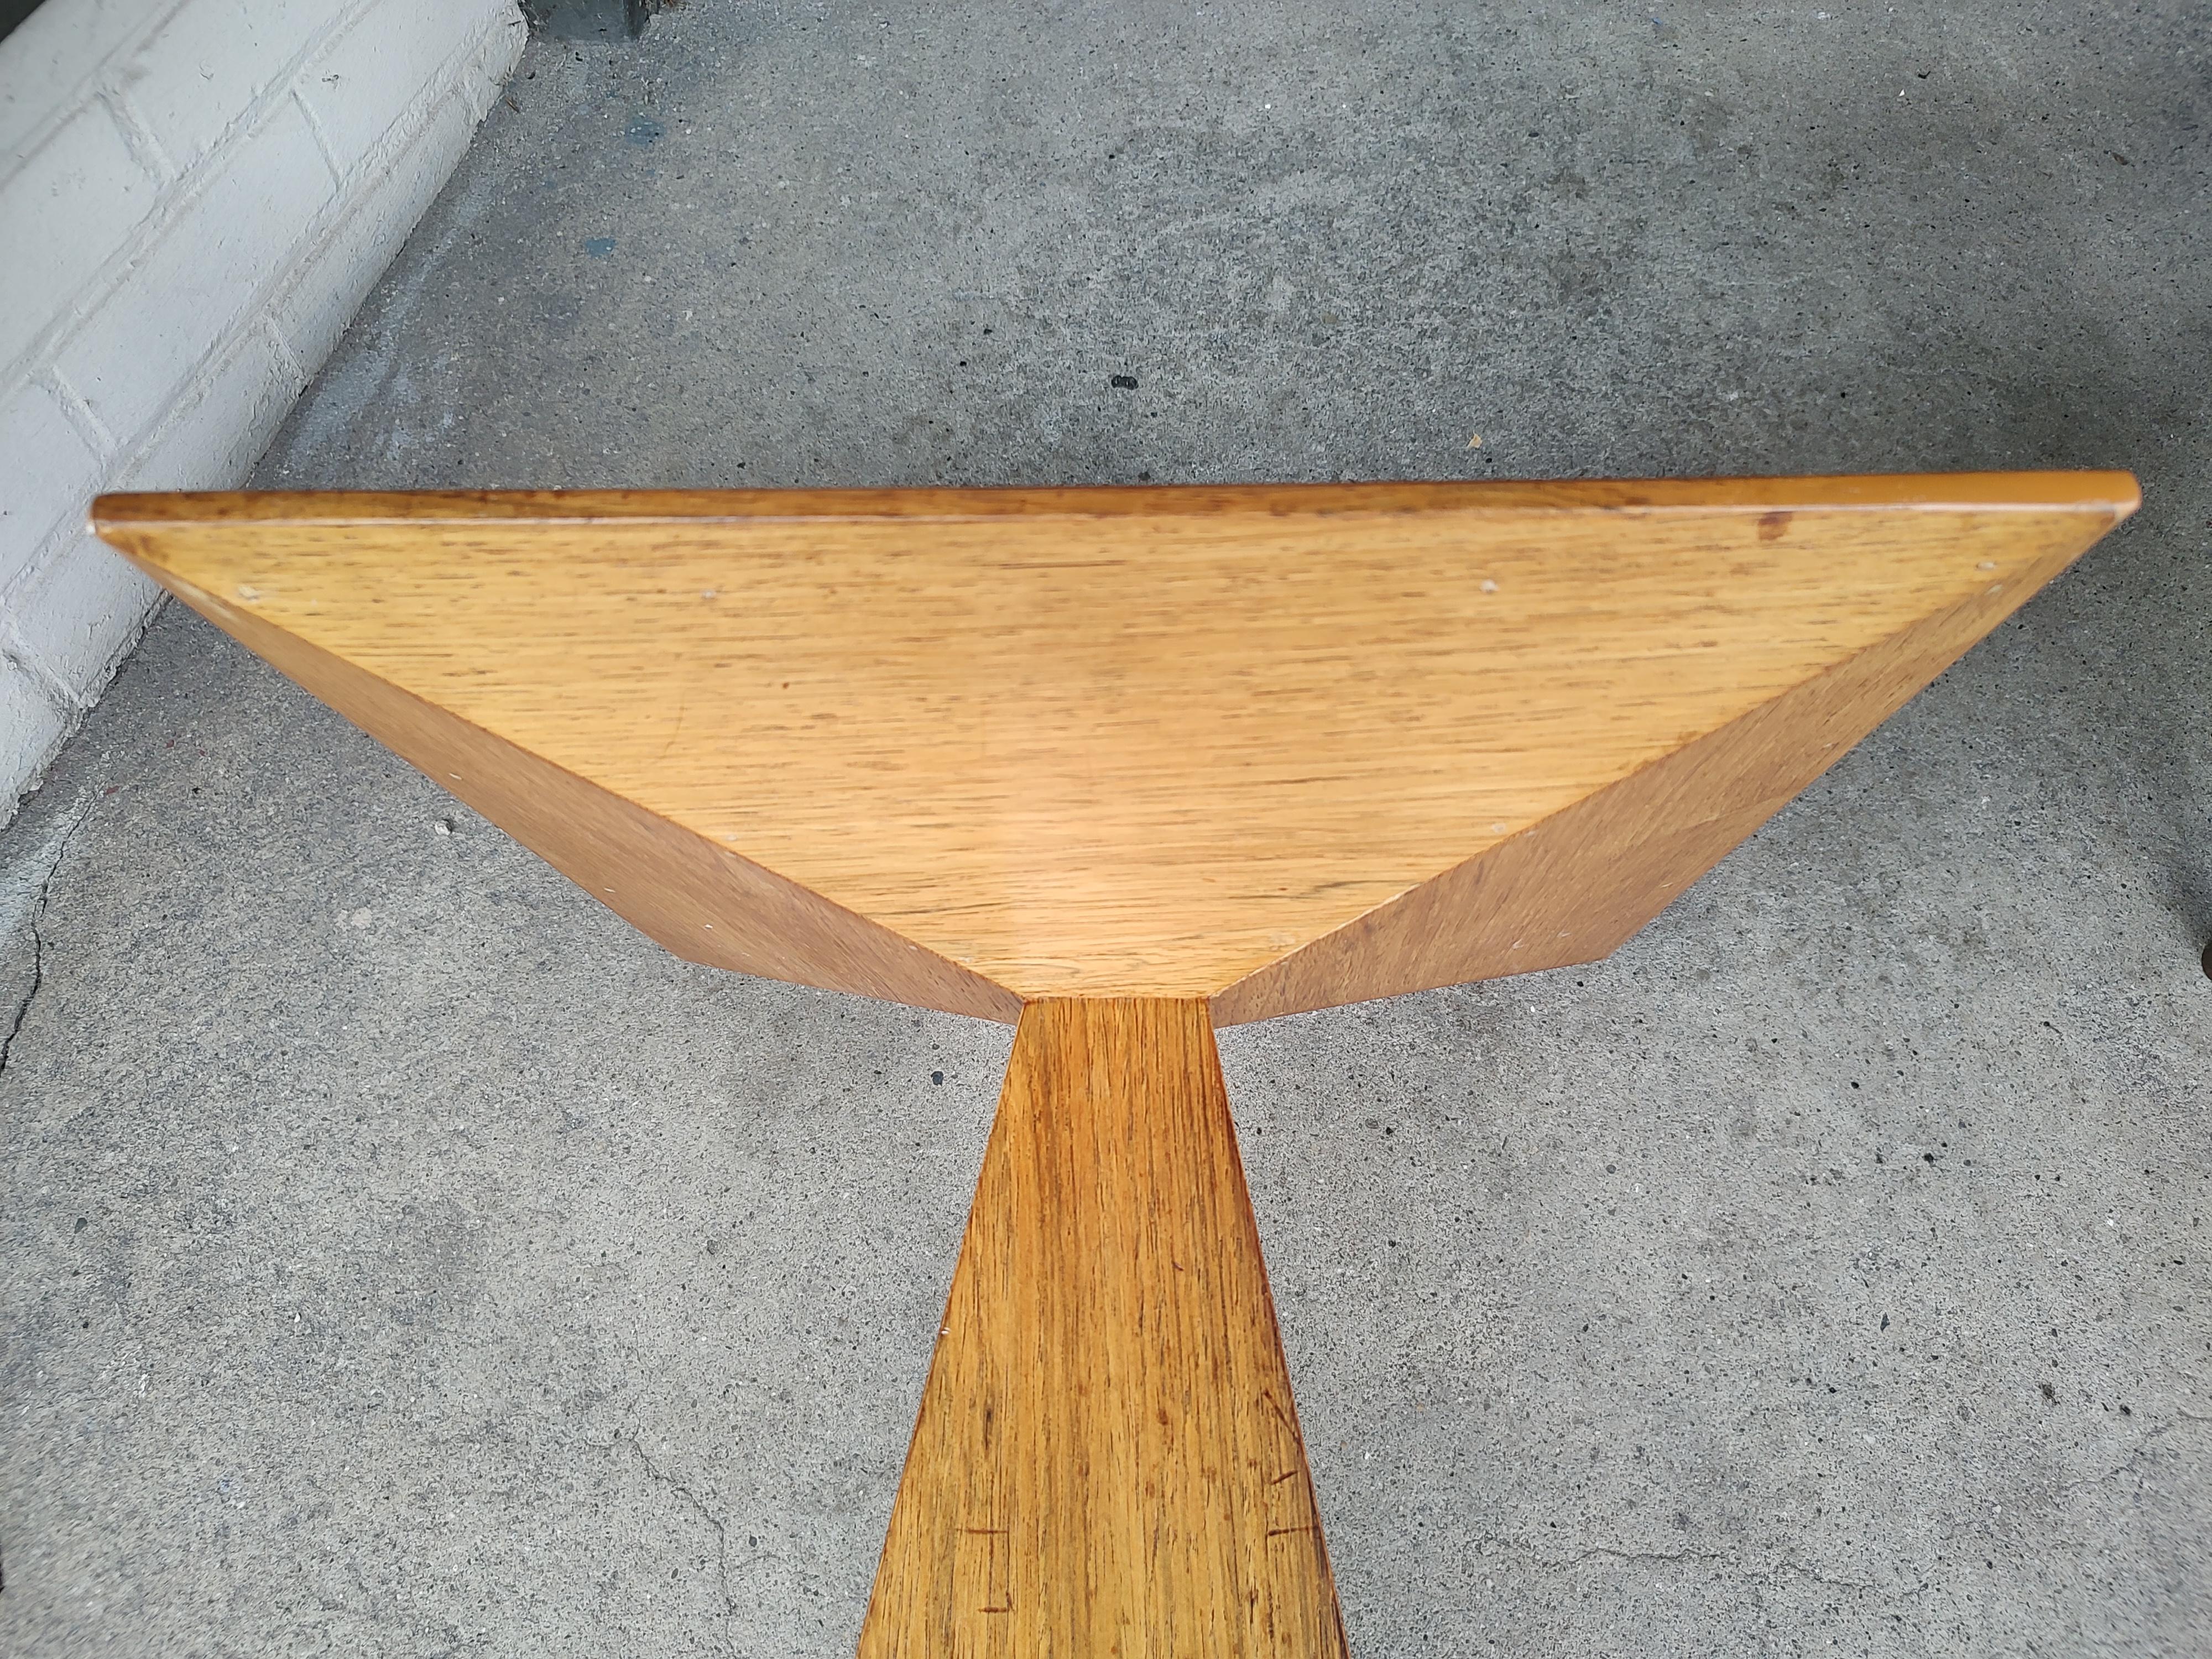 Rare hard to find table in the form of a pyramid base with a quartered top in wenge wood. Spectacular design. In excellent vintage condition with minimal wear. Can be parcel posted.